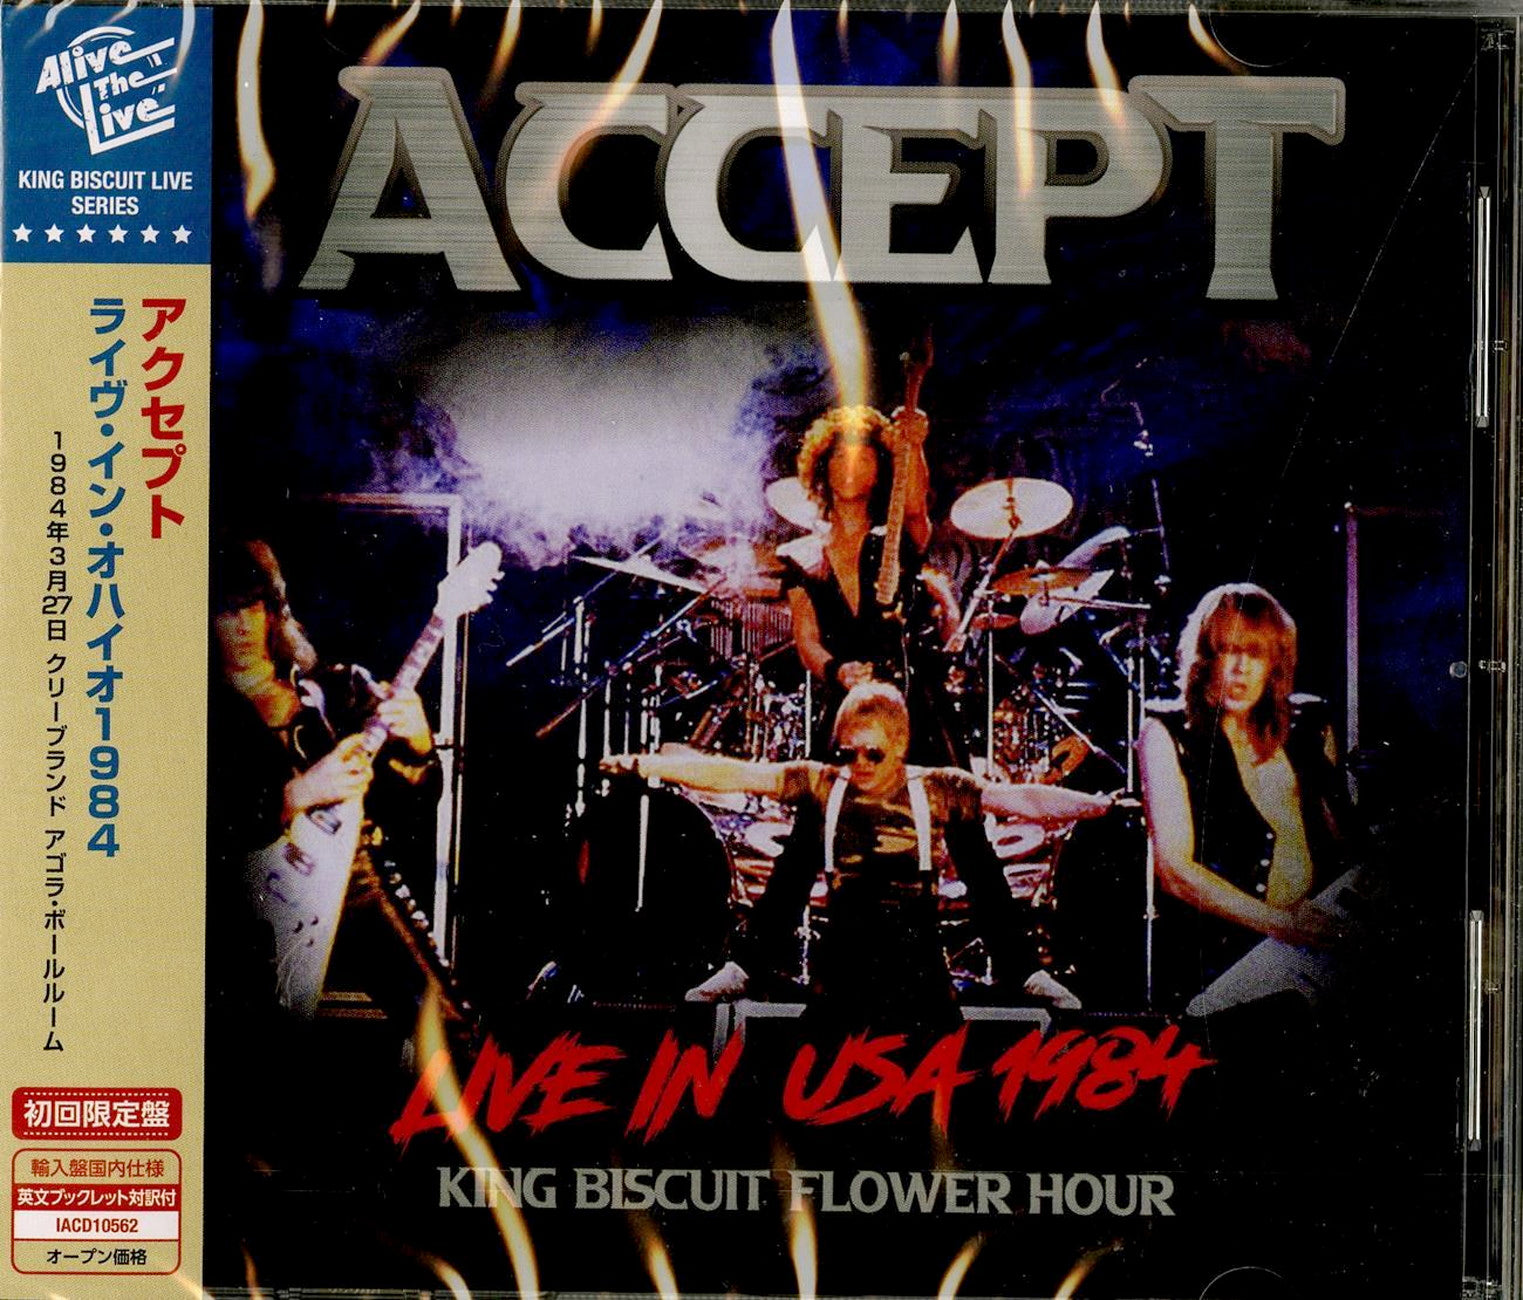 Accept - Live In The Usa 1984 - Import CD Bonus Track Limited